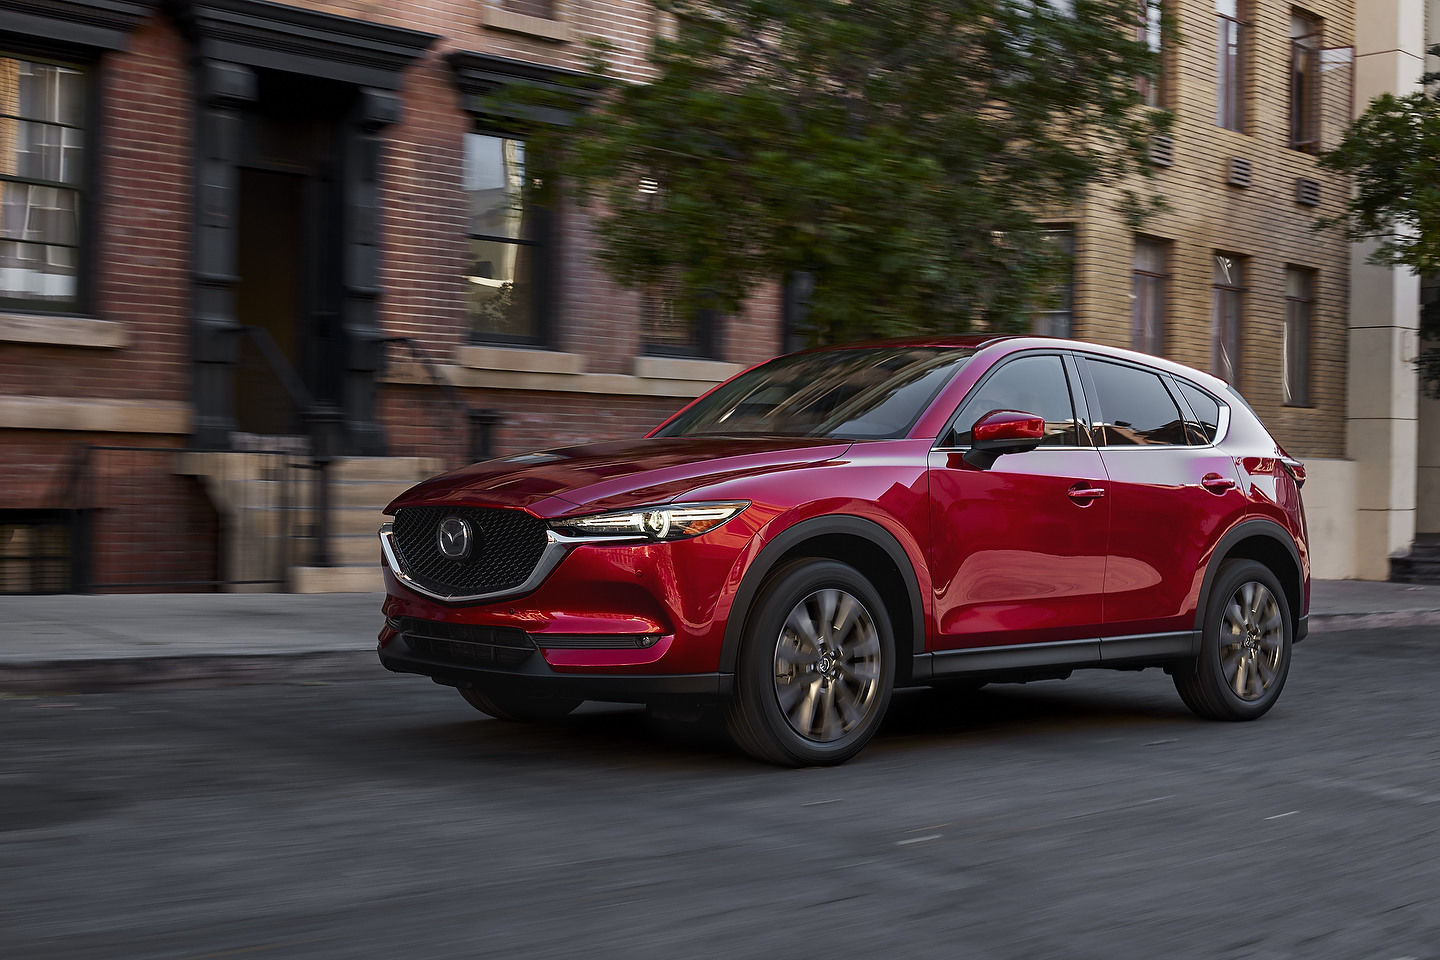 2021 Mazda CX-5 vs. 2021 Nissan Rogue: The CX-5 Elevates Your Driving Experience